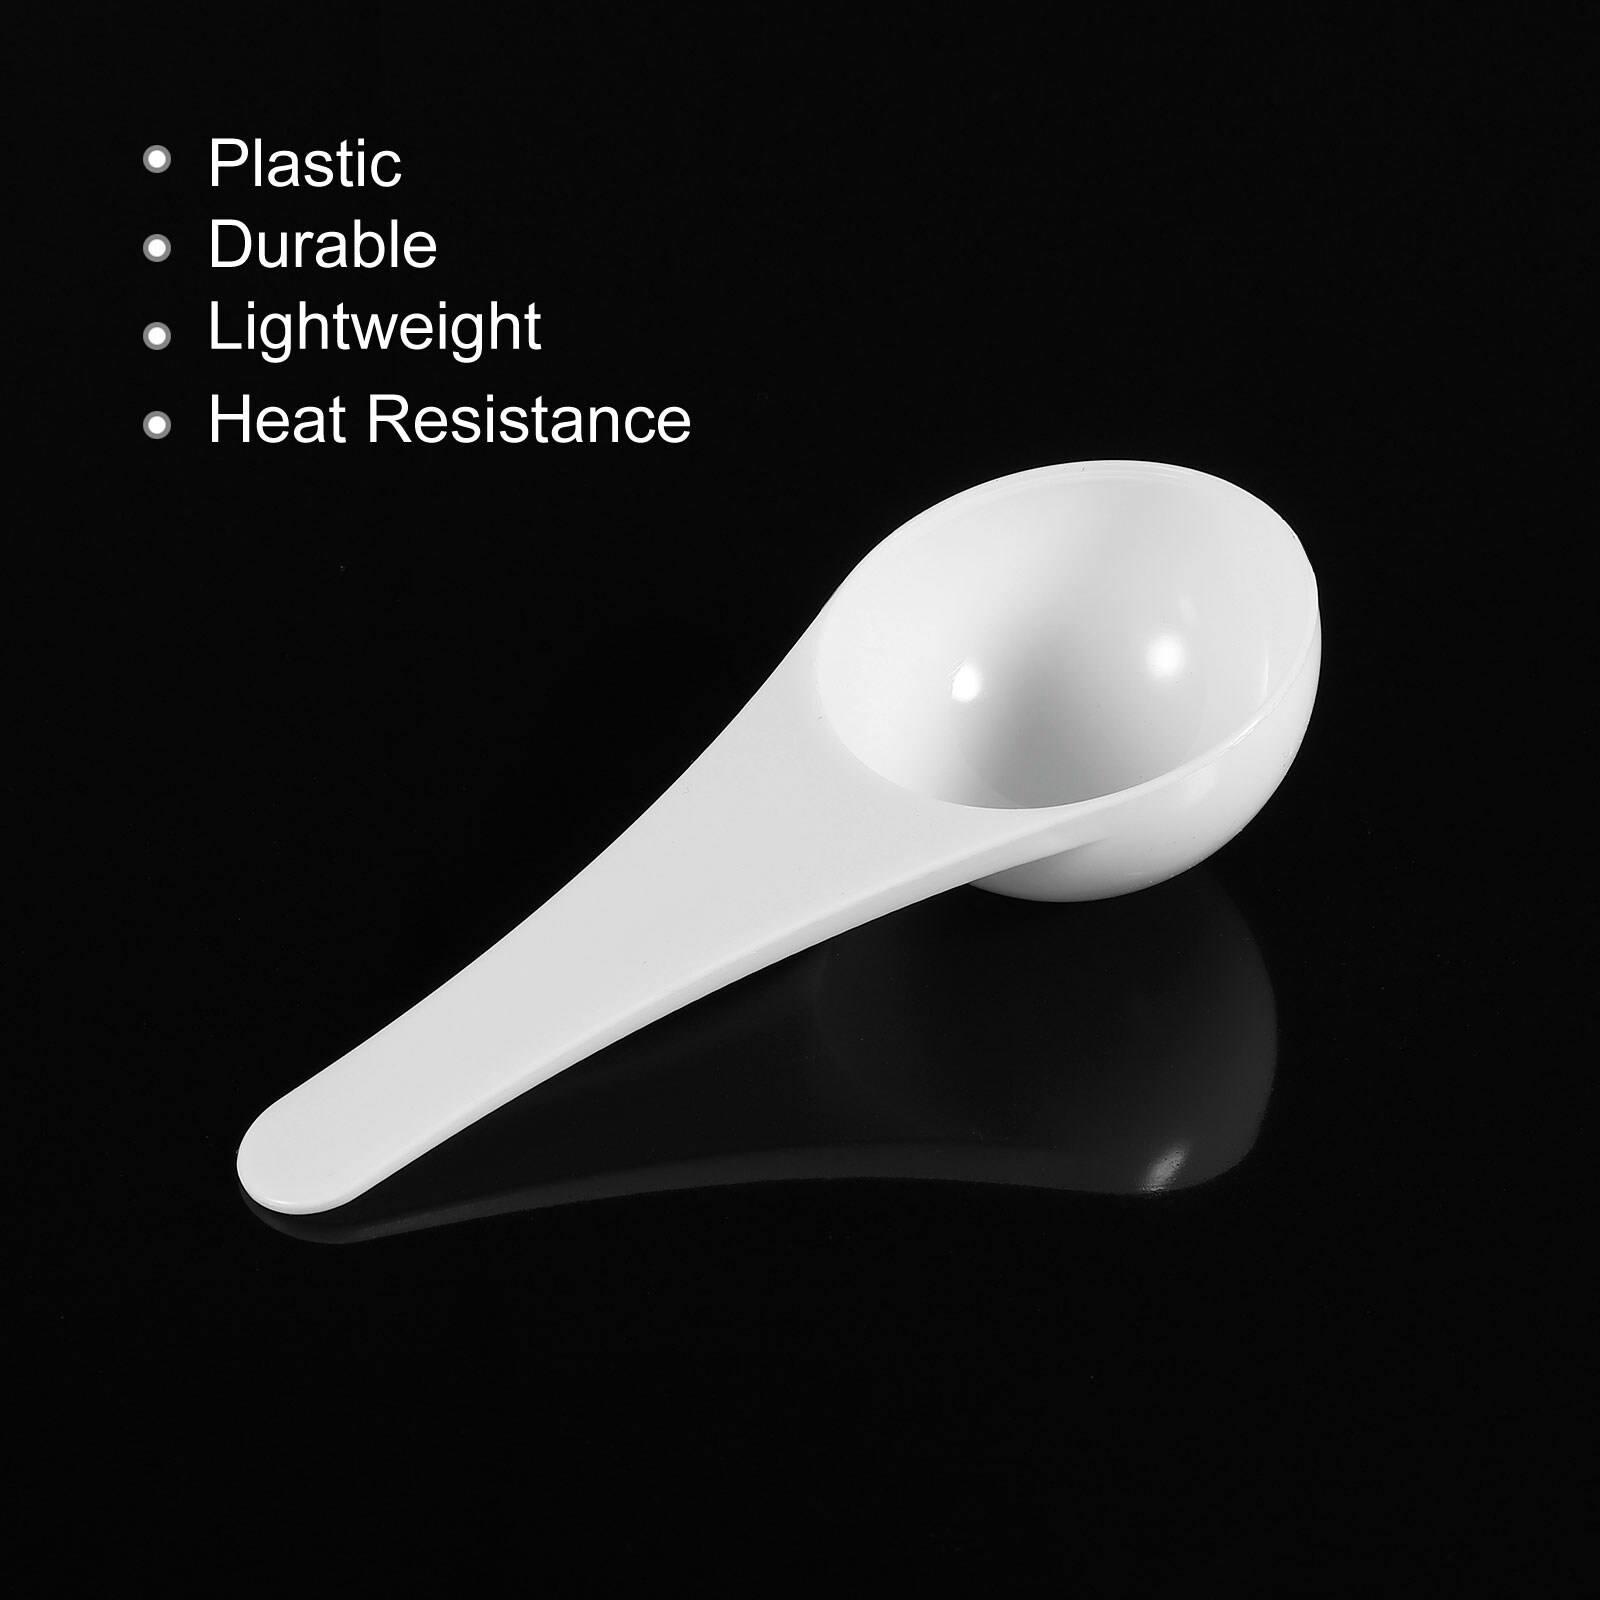 https://ak1.ostkcdn.com/images/products/is/images/direct/0d3bffc33a6c4615f1cba3cb866beb3e4288f0d9/Micro-Spoons-15-Gram-Measuring-Scoop-Plastic-Round-Bottom-Mini-Spoon-15Pcs.jpg